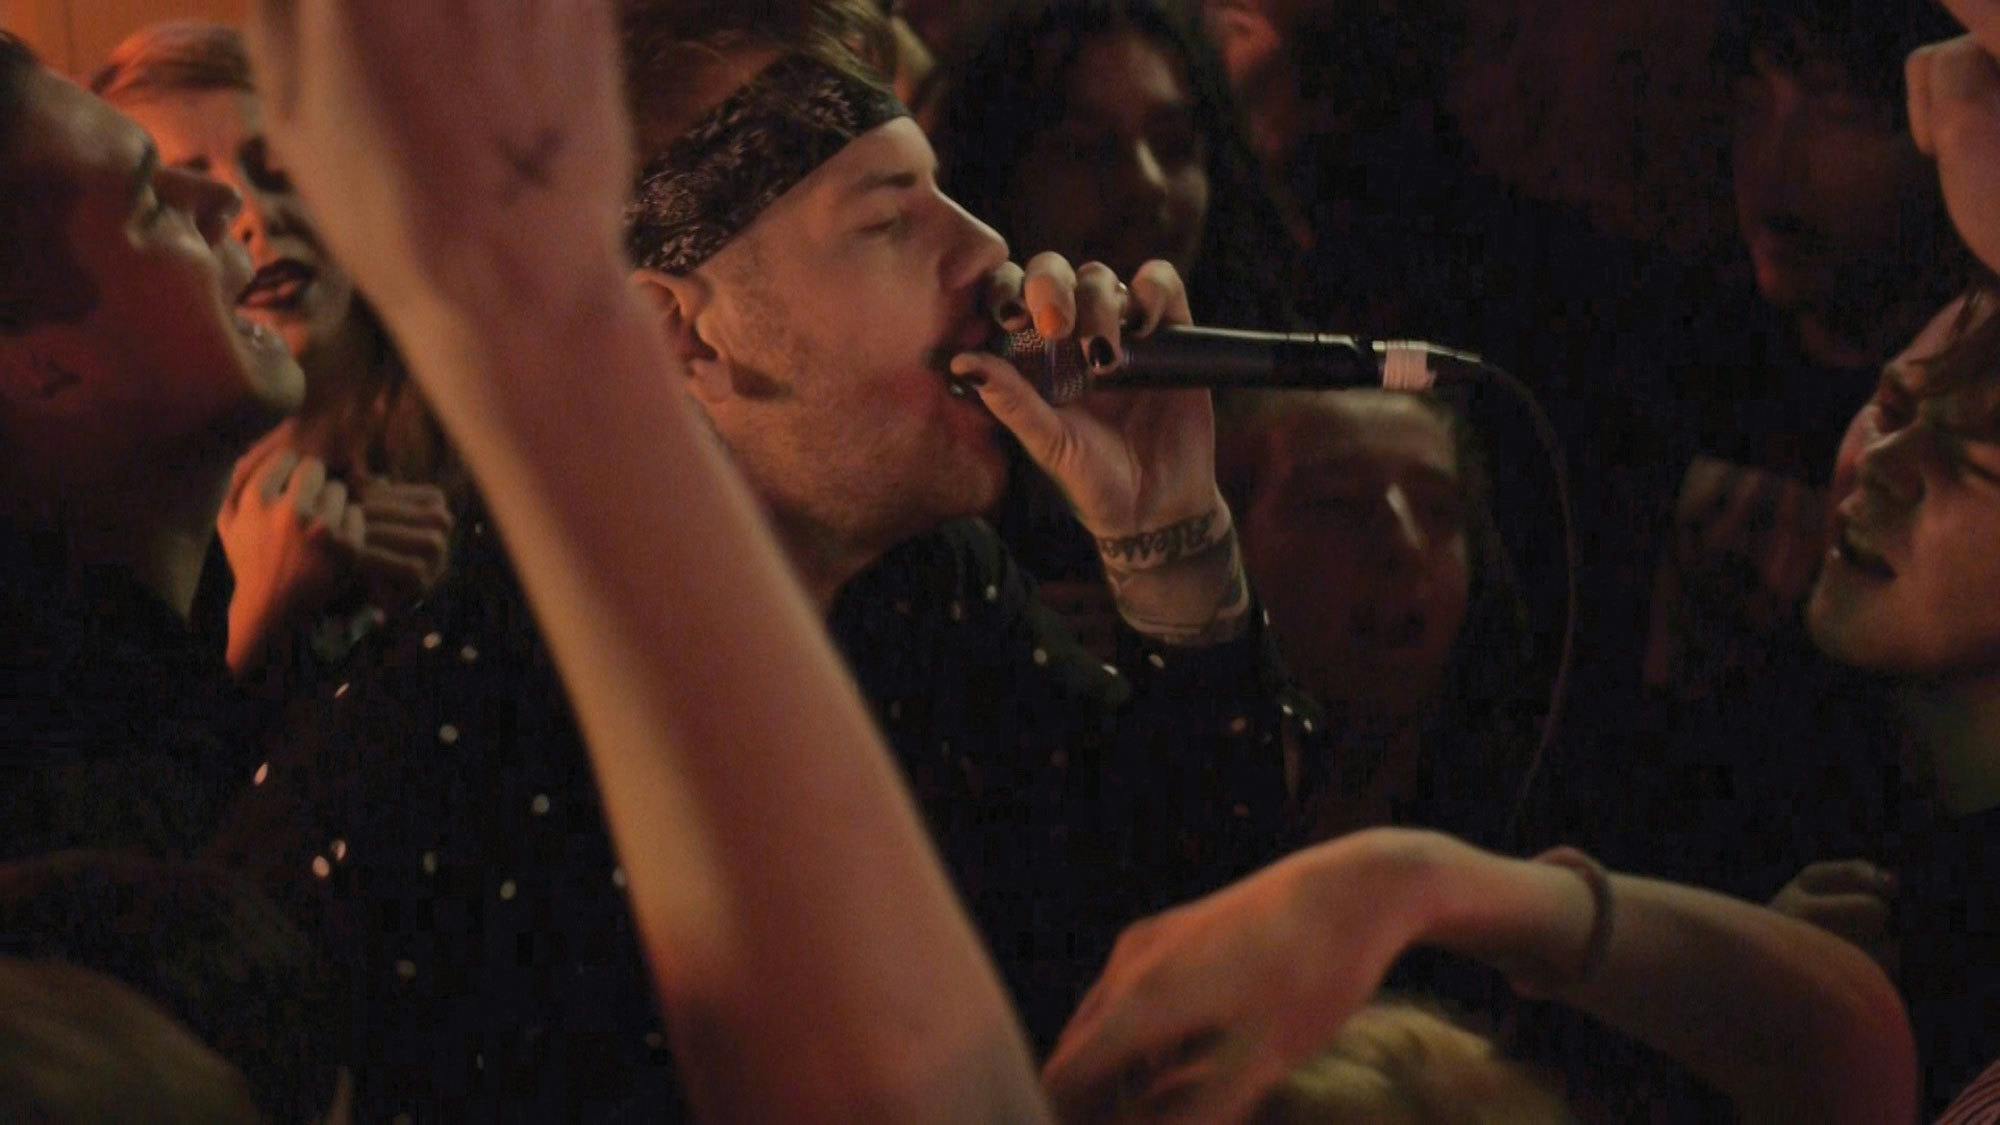 Watch Beartooth send bodies flying at a tiny dive bar gig